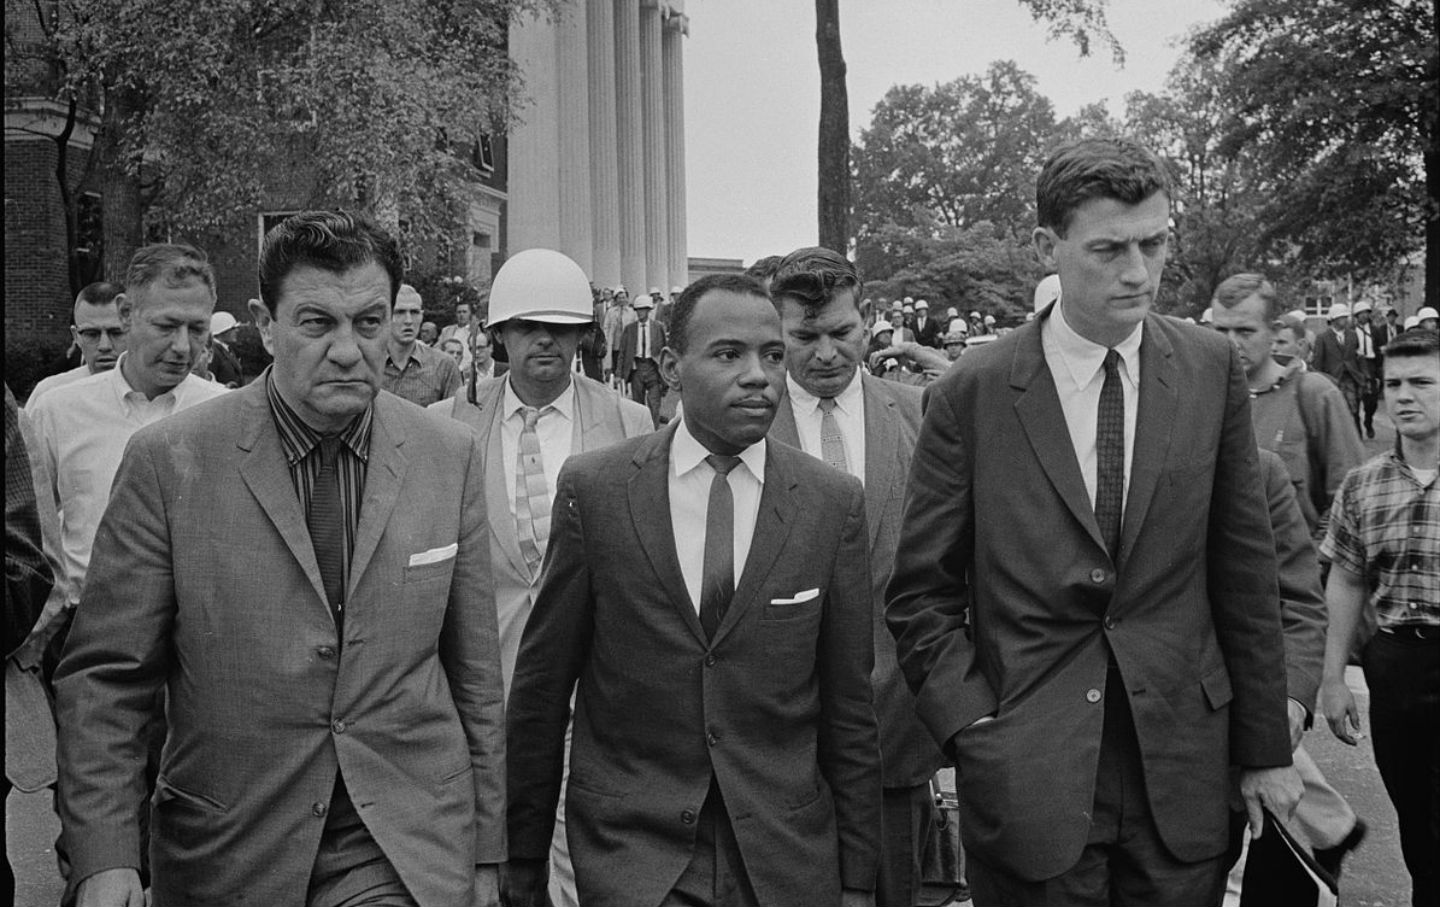 September 20, 1962: Ole Miss Denies Admission to James Meredith